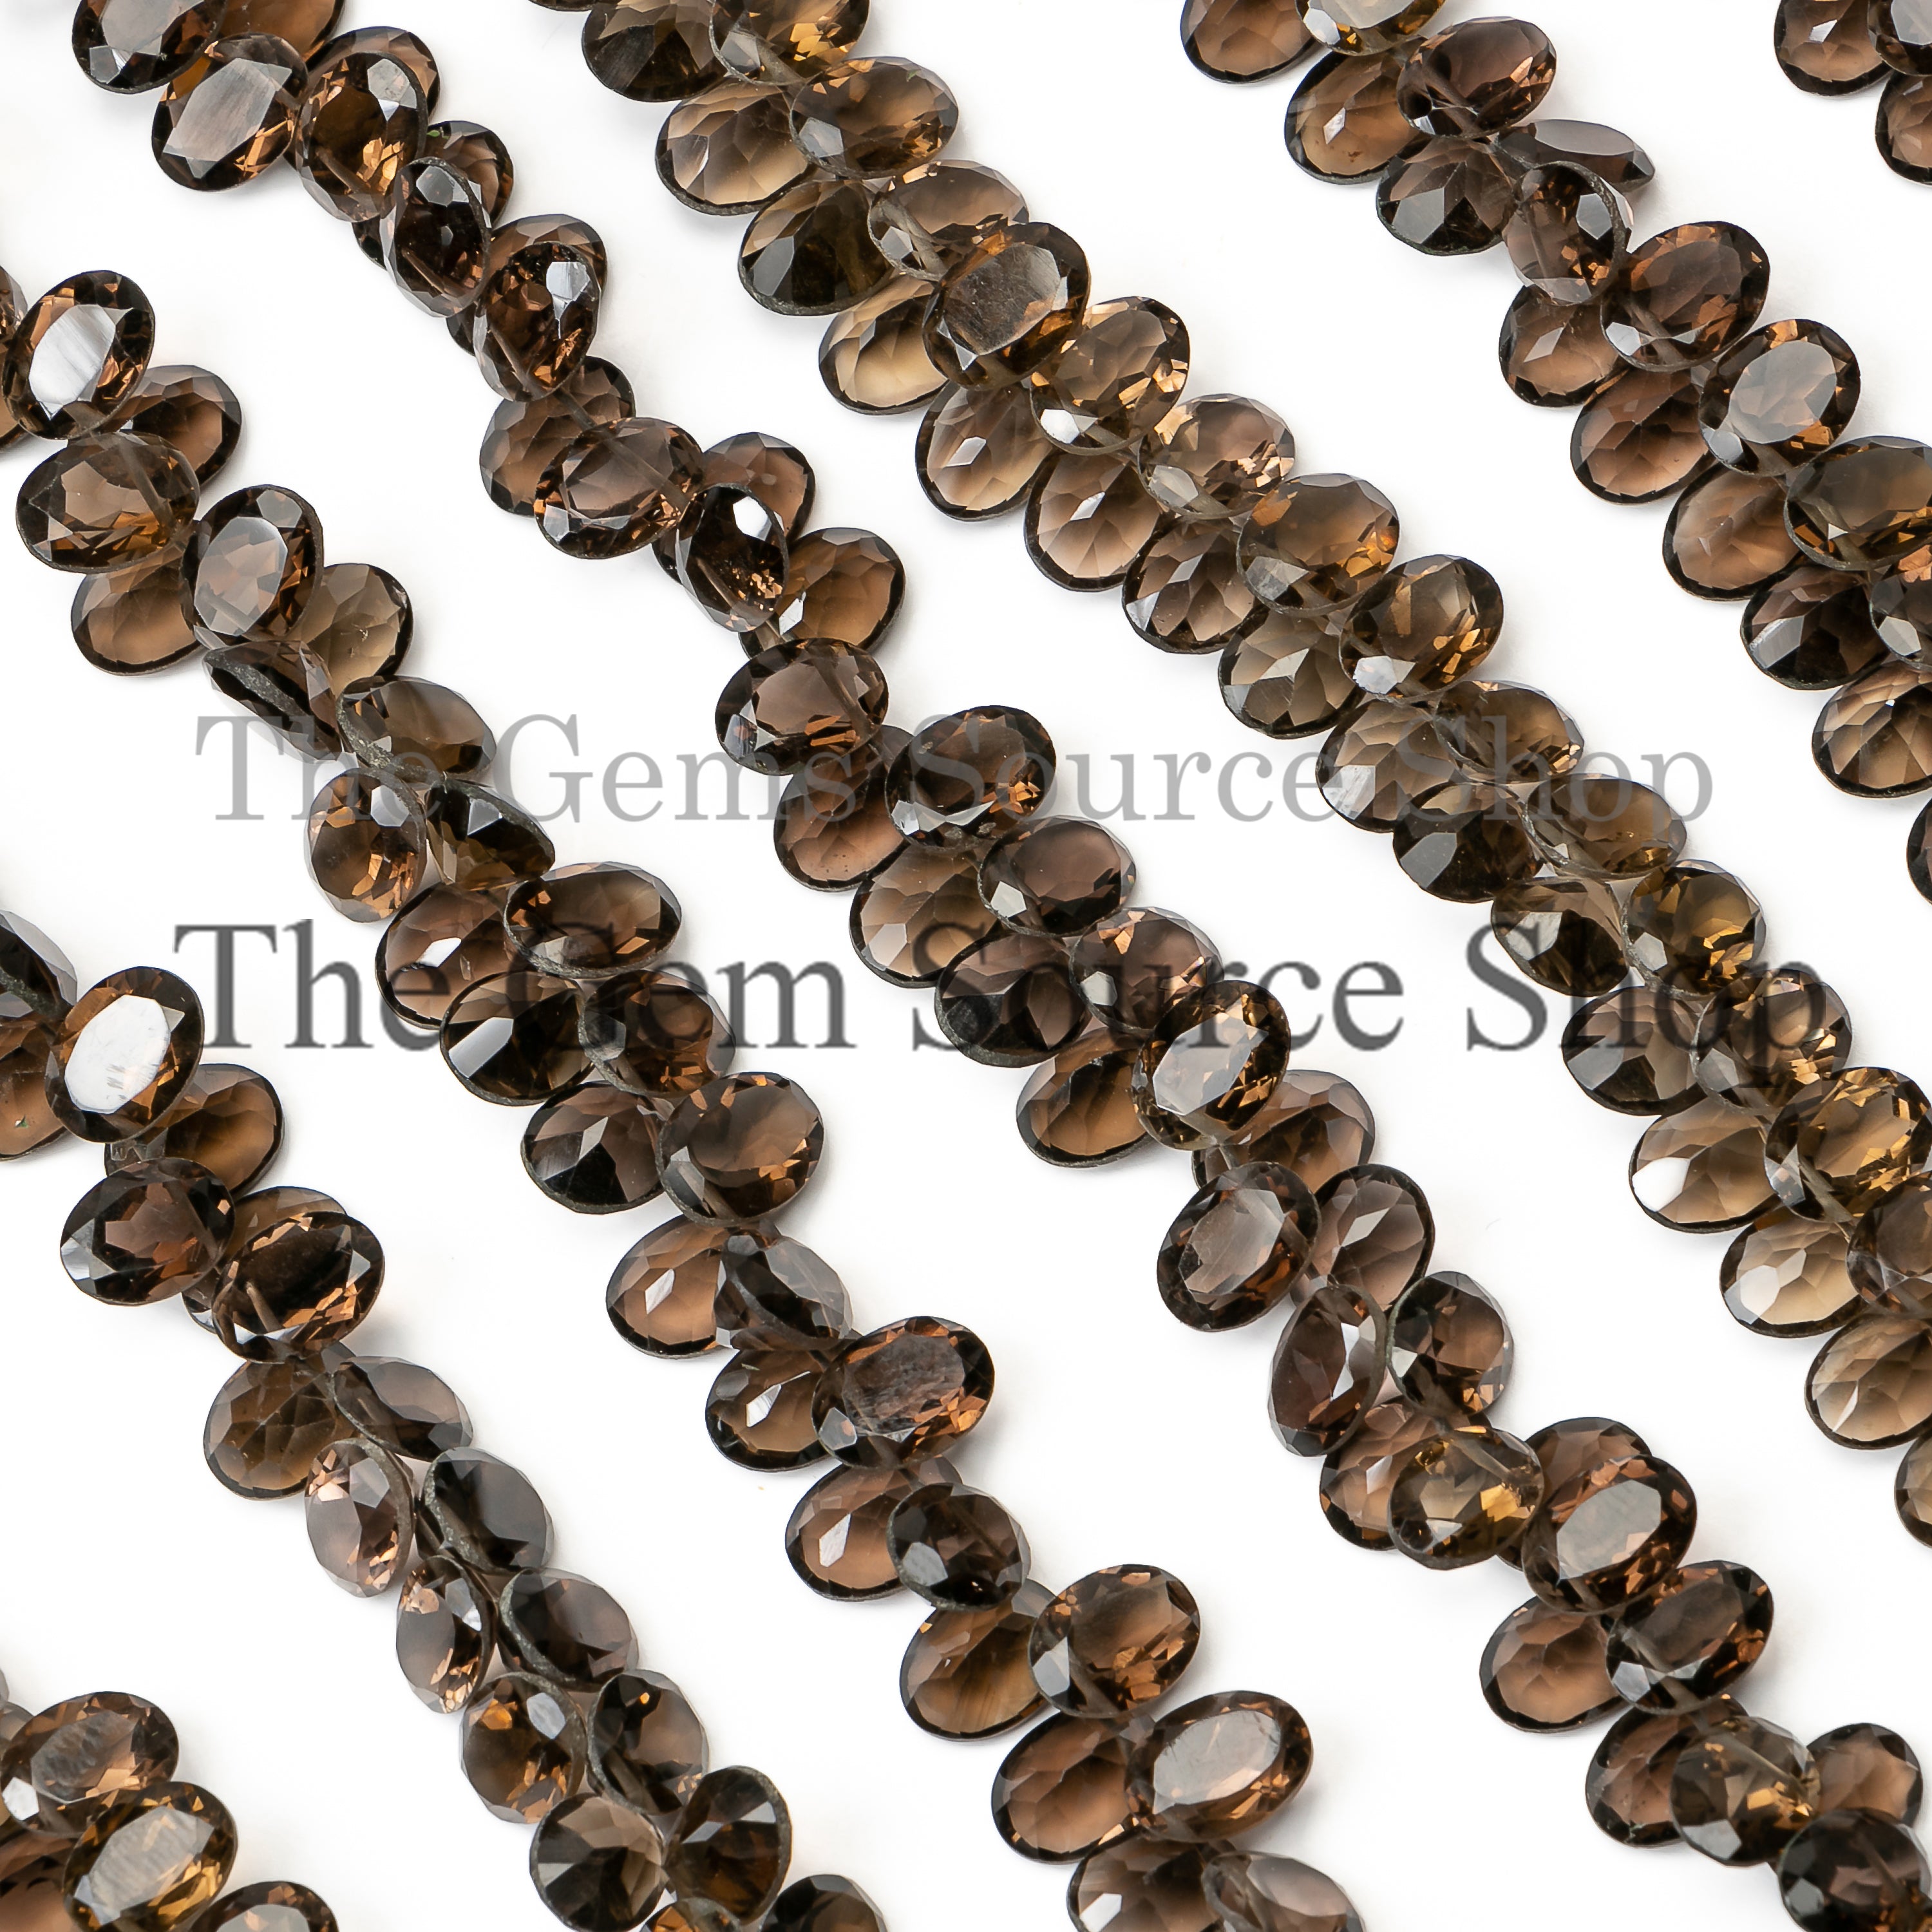 6X8mm Smoky Quartz Faceted Oval Beads, Smoky Quartz Beads, Quartz Briolette Cut Oval Beads, AAA Quality Necklace Beads